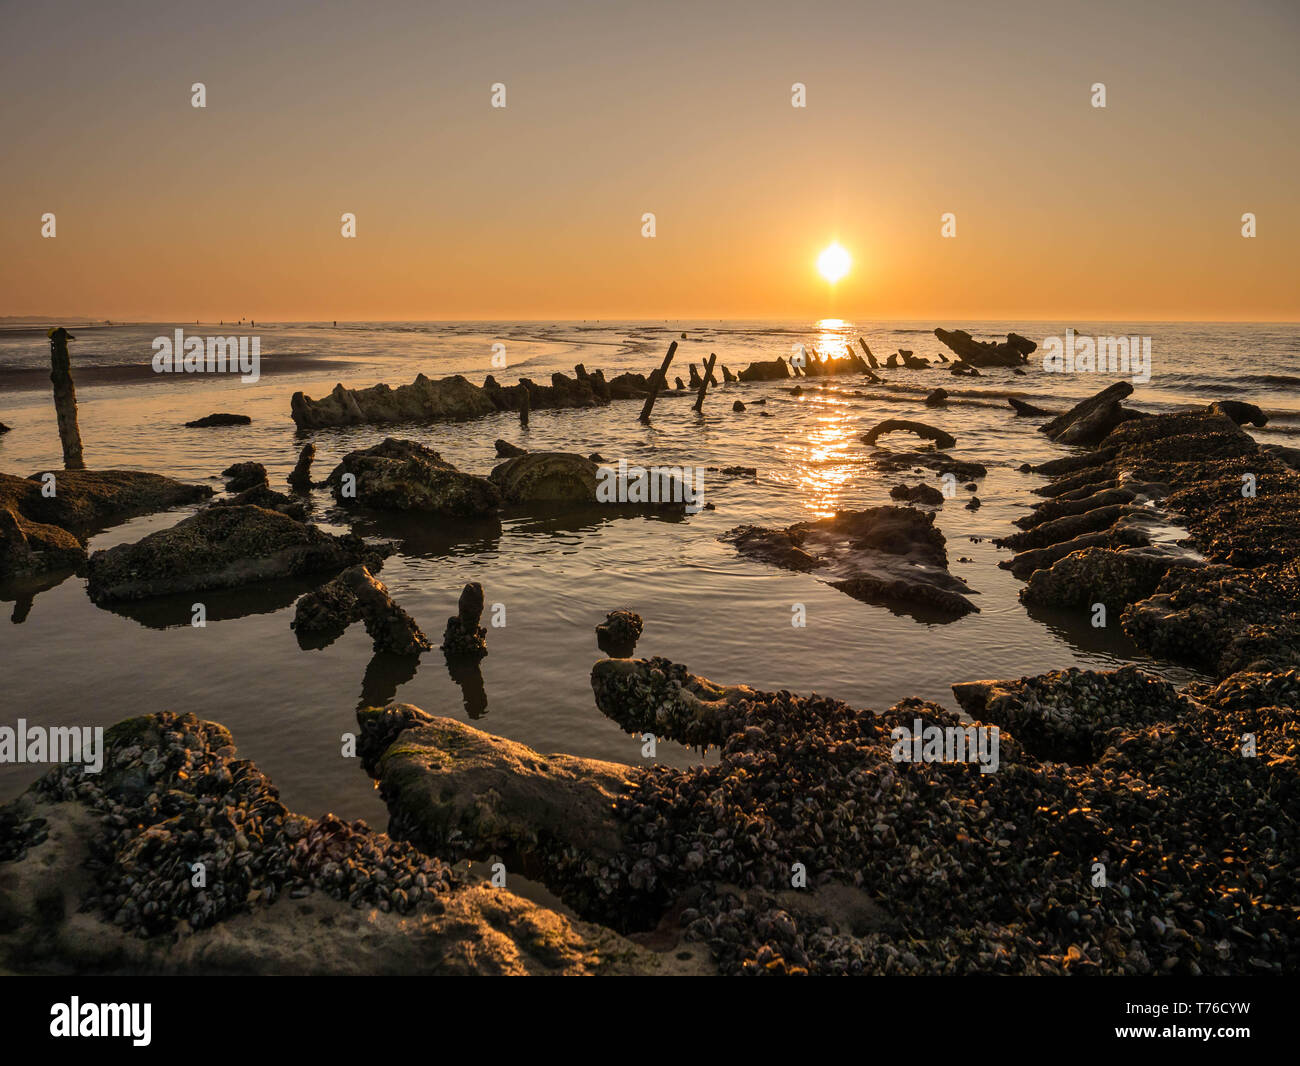 Low tide at sunset exposes a sunken shipwreck from World War II close to the beach Stock Photo